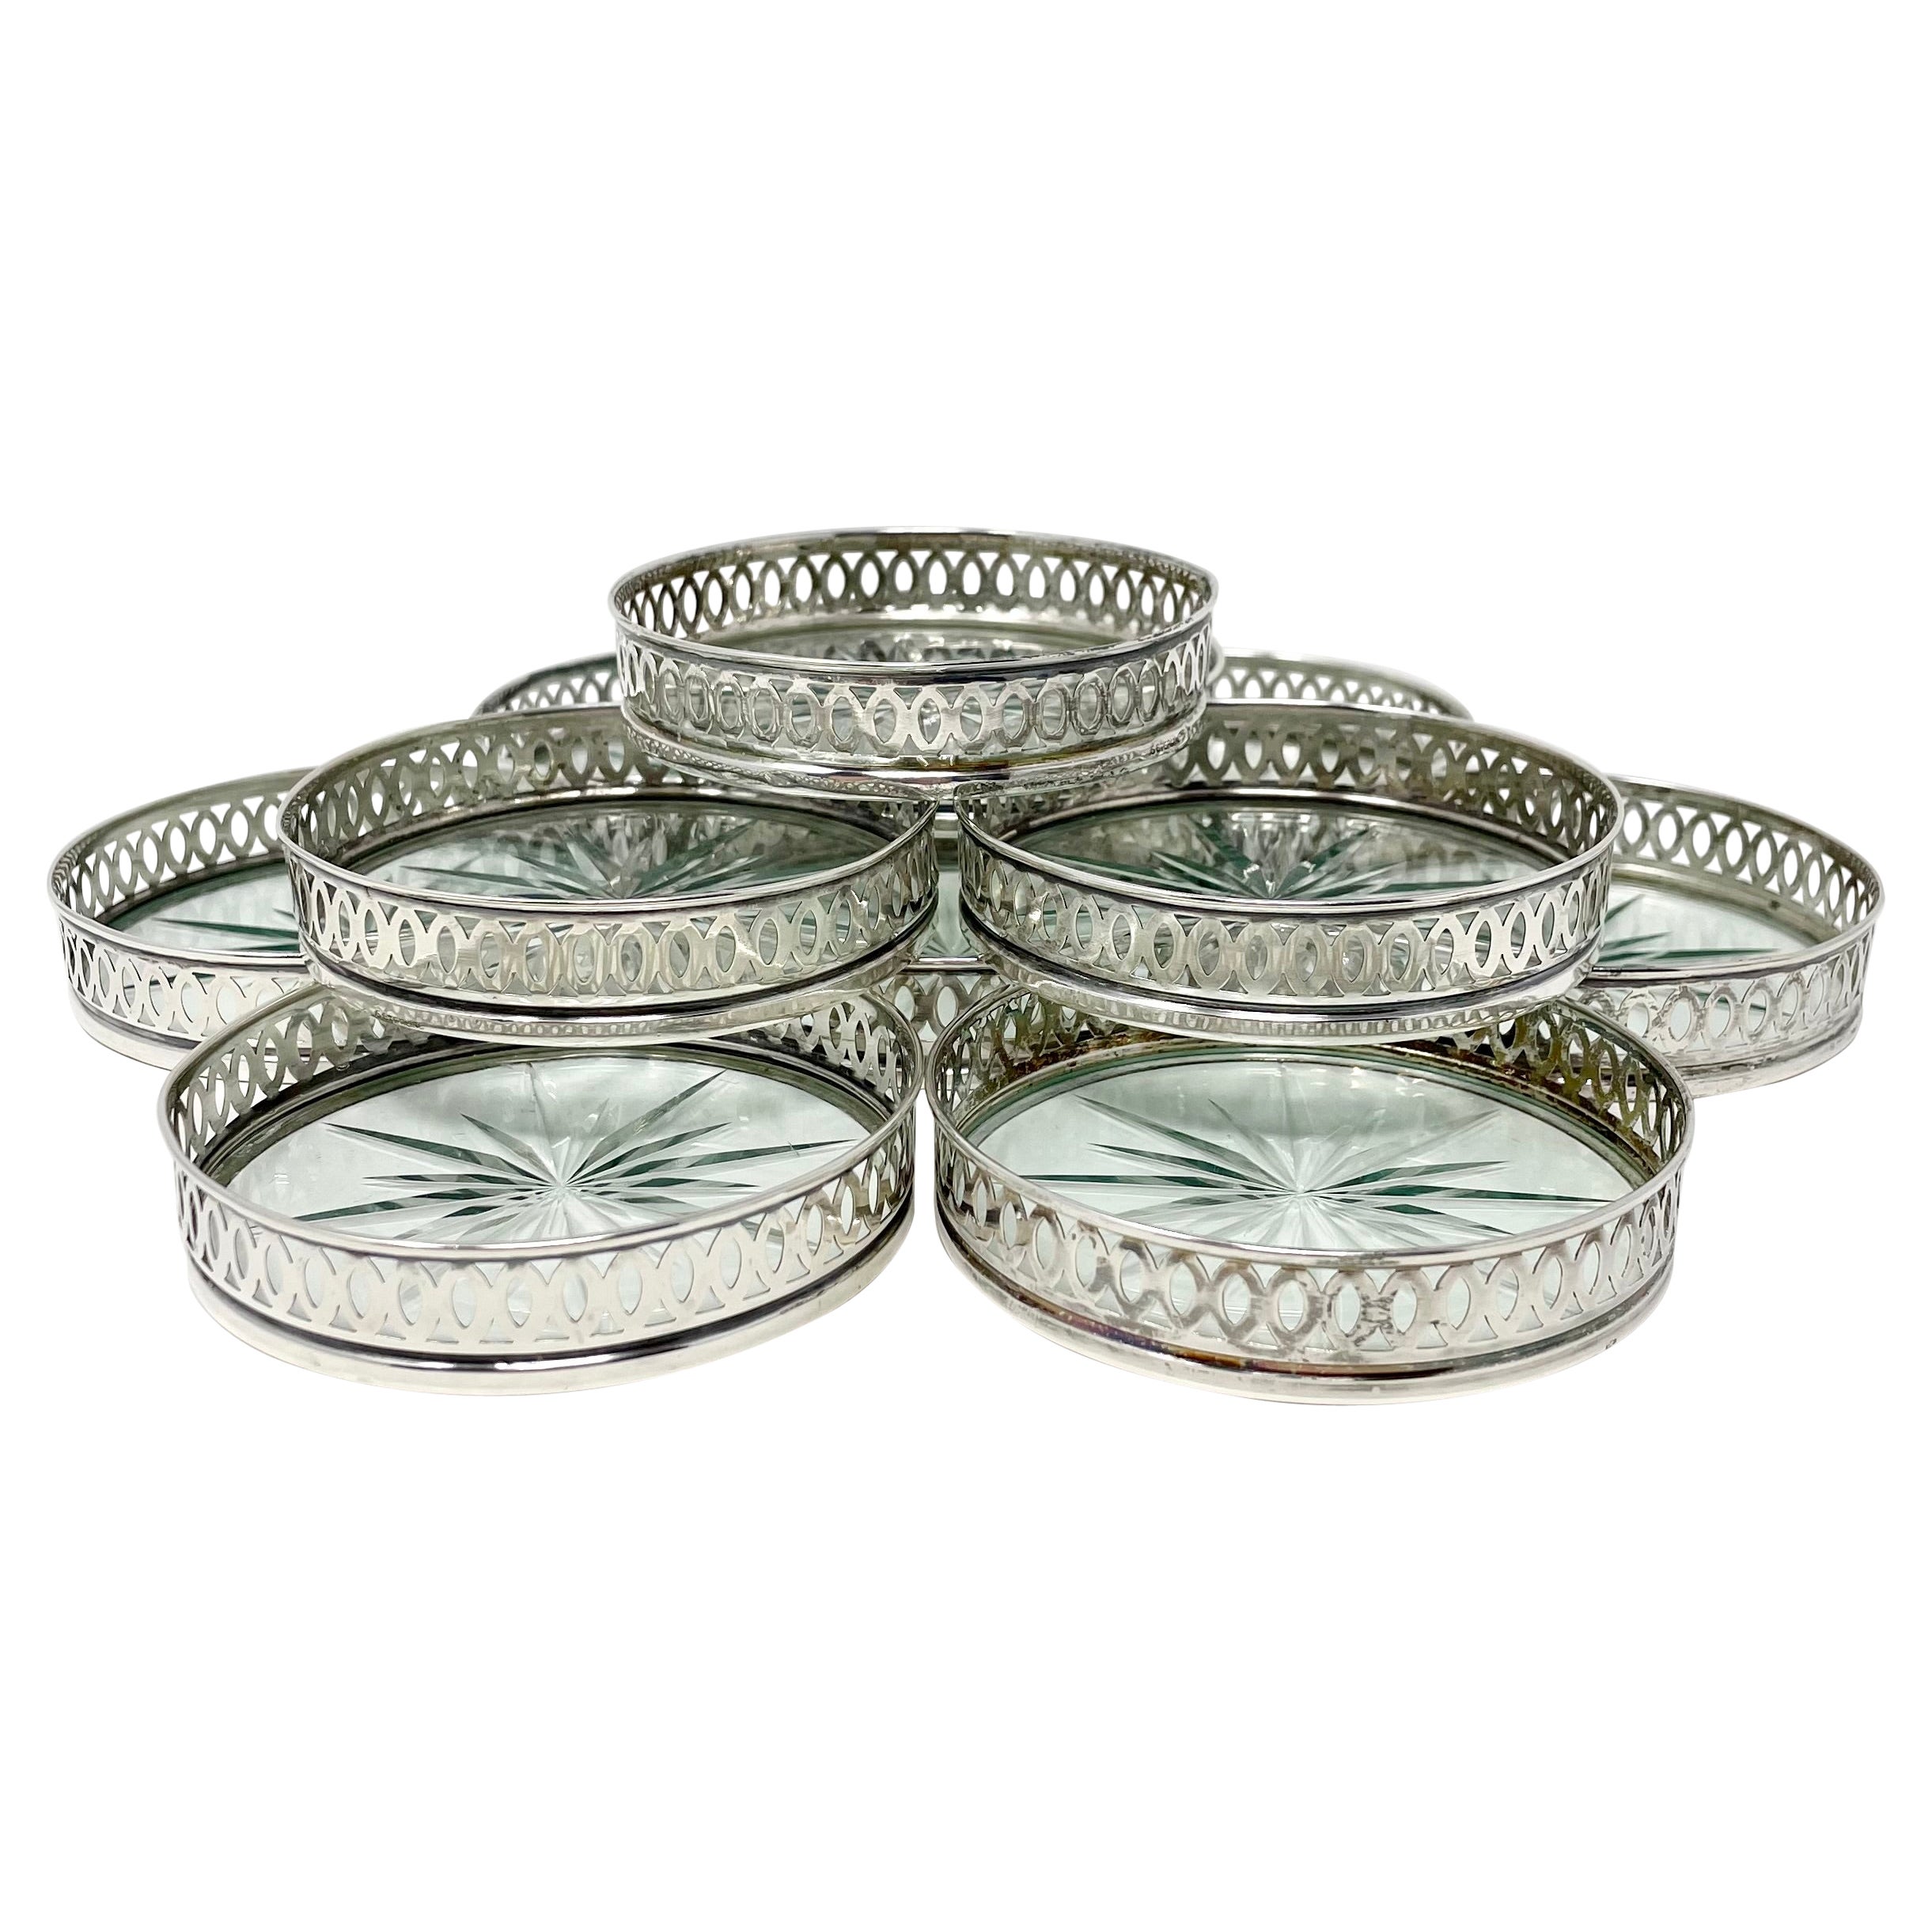 Set of 10 Antique Sterling Silver and Cut Crystal Drink Coasters, Circa 1920's.